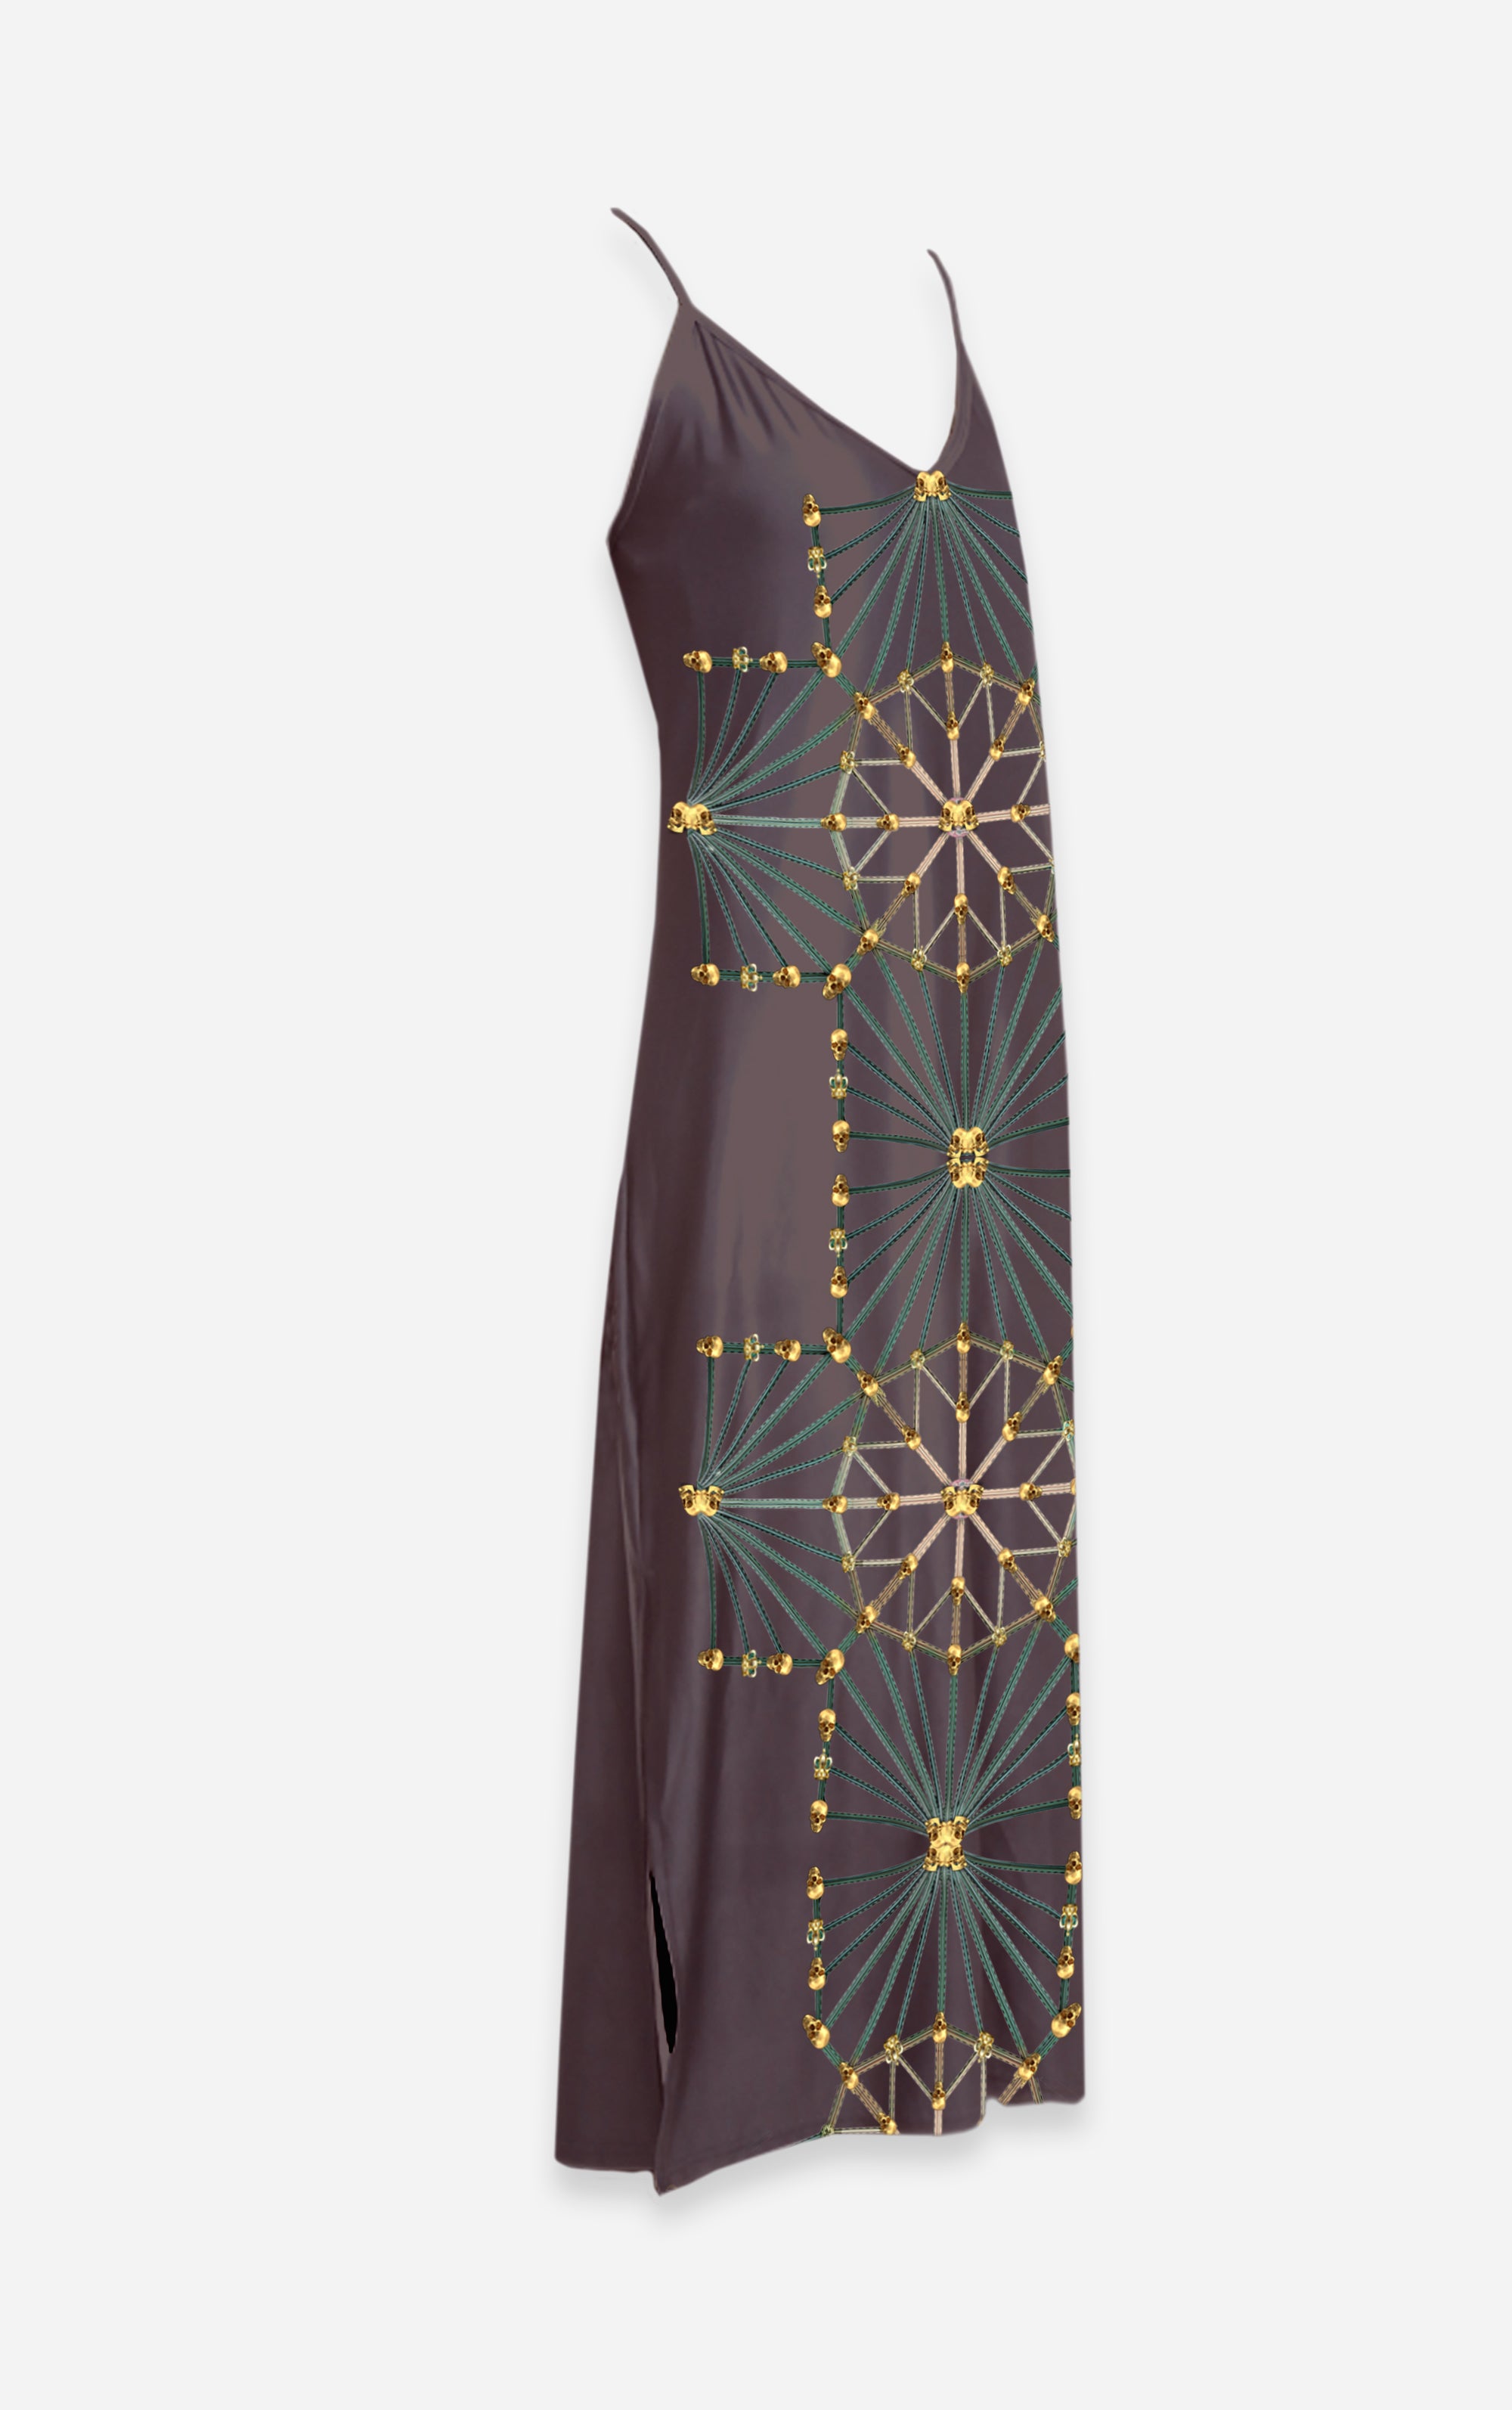 Skull Cathedral- French Gothic V Neck Slip Dress in Muted Eggplant Wine | Le Leanian™